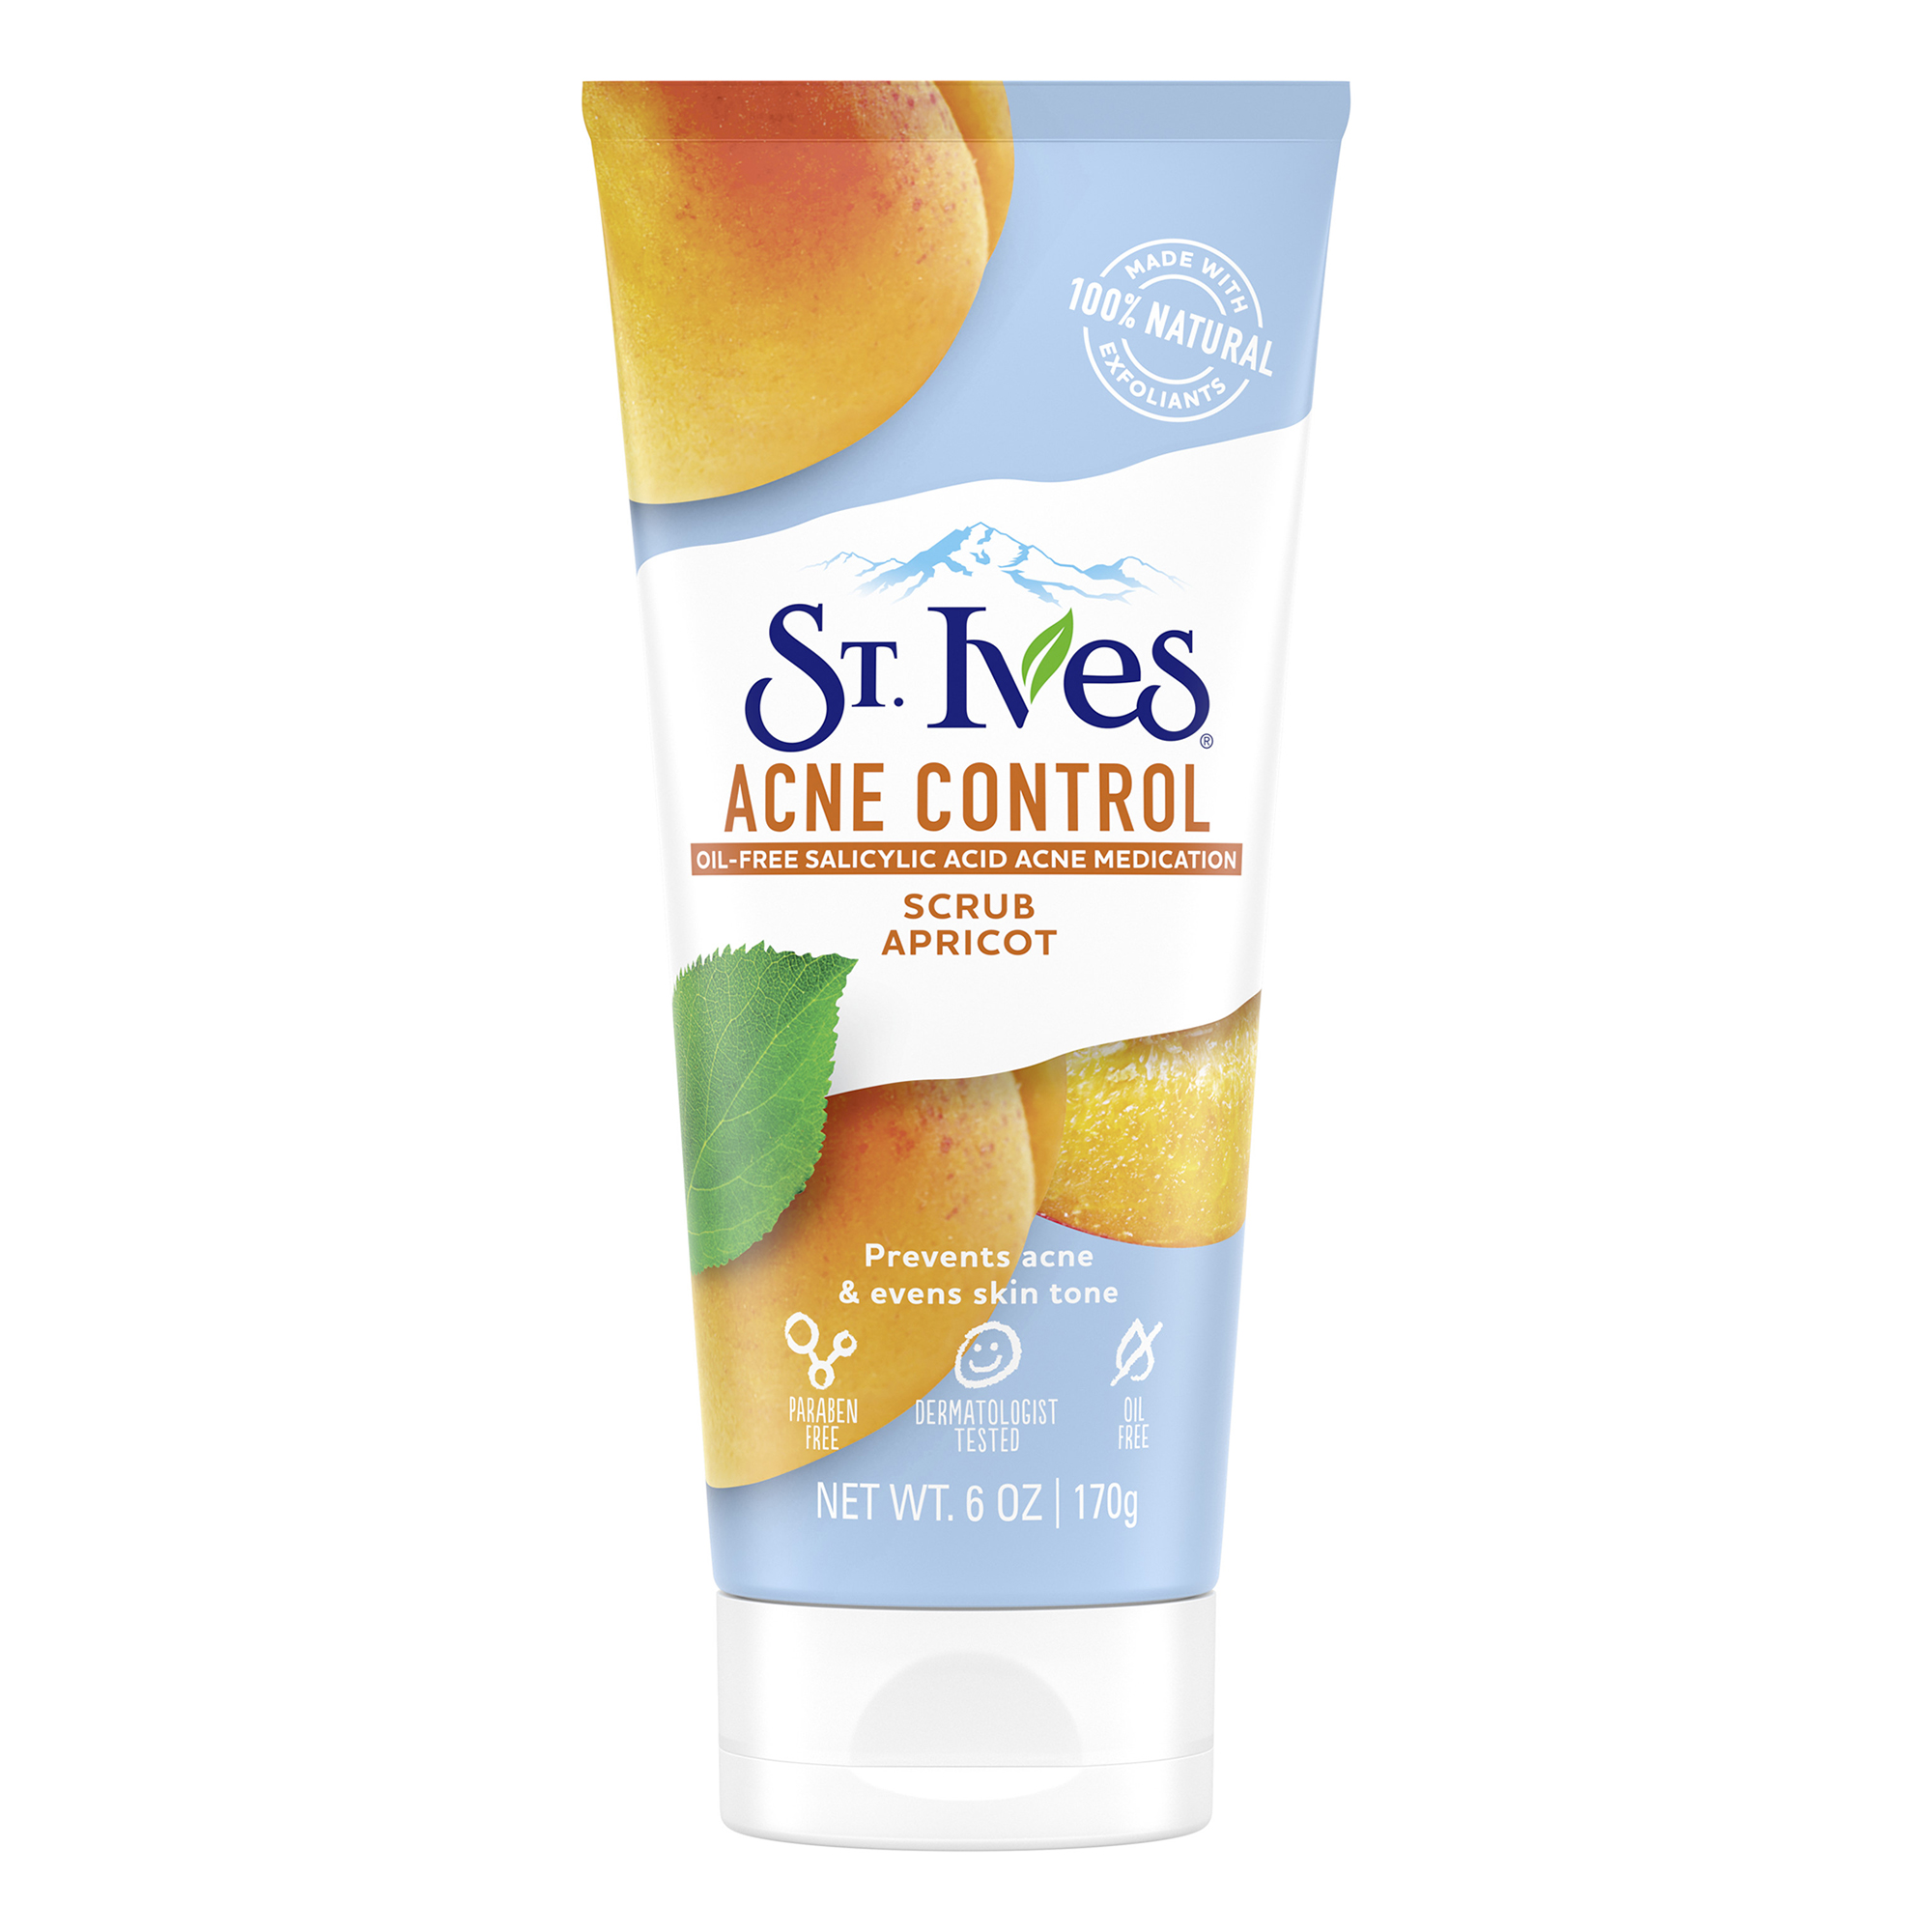 St. Ives Acne Control Apricot Face Scrub, 6 oz - image 10 of 13